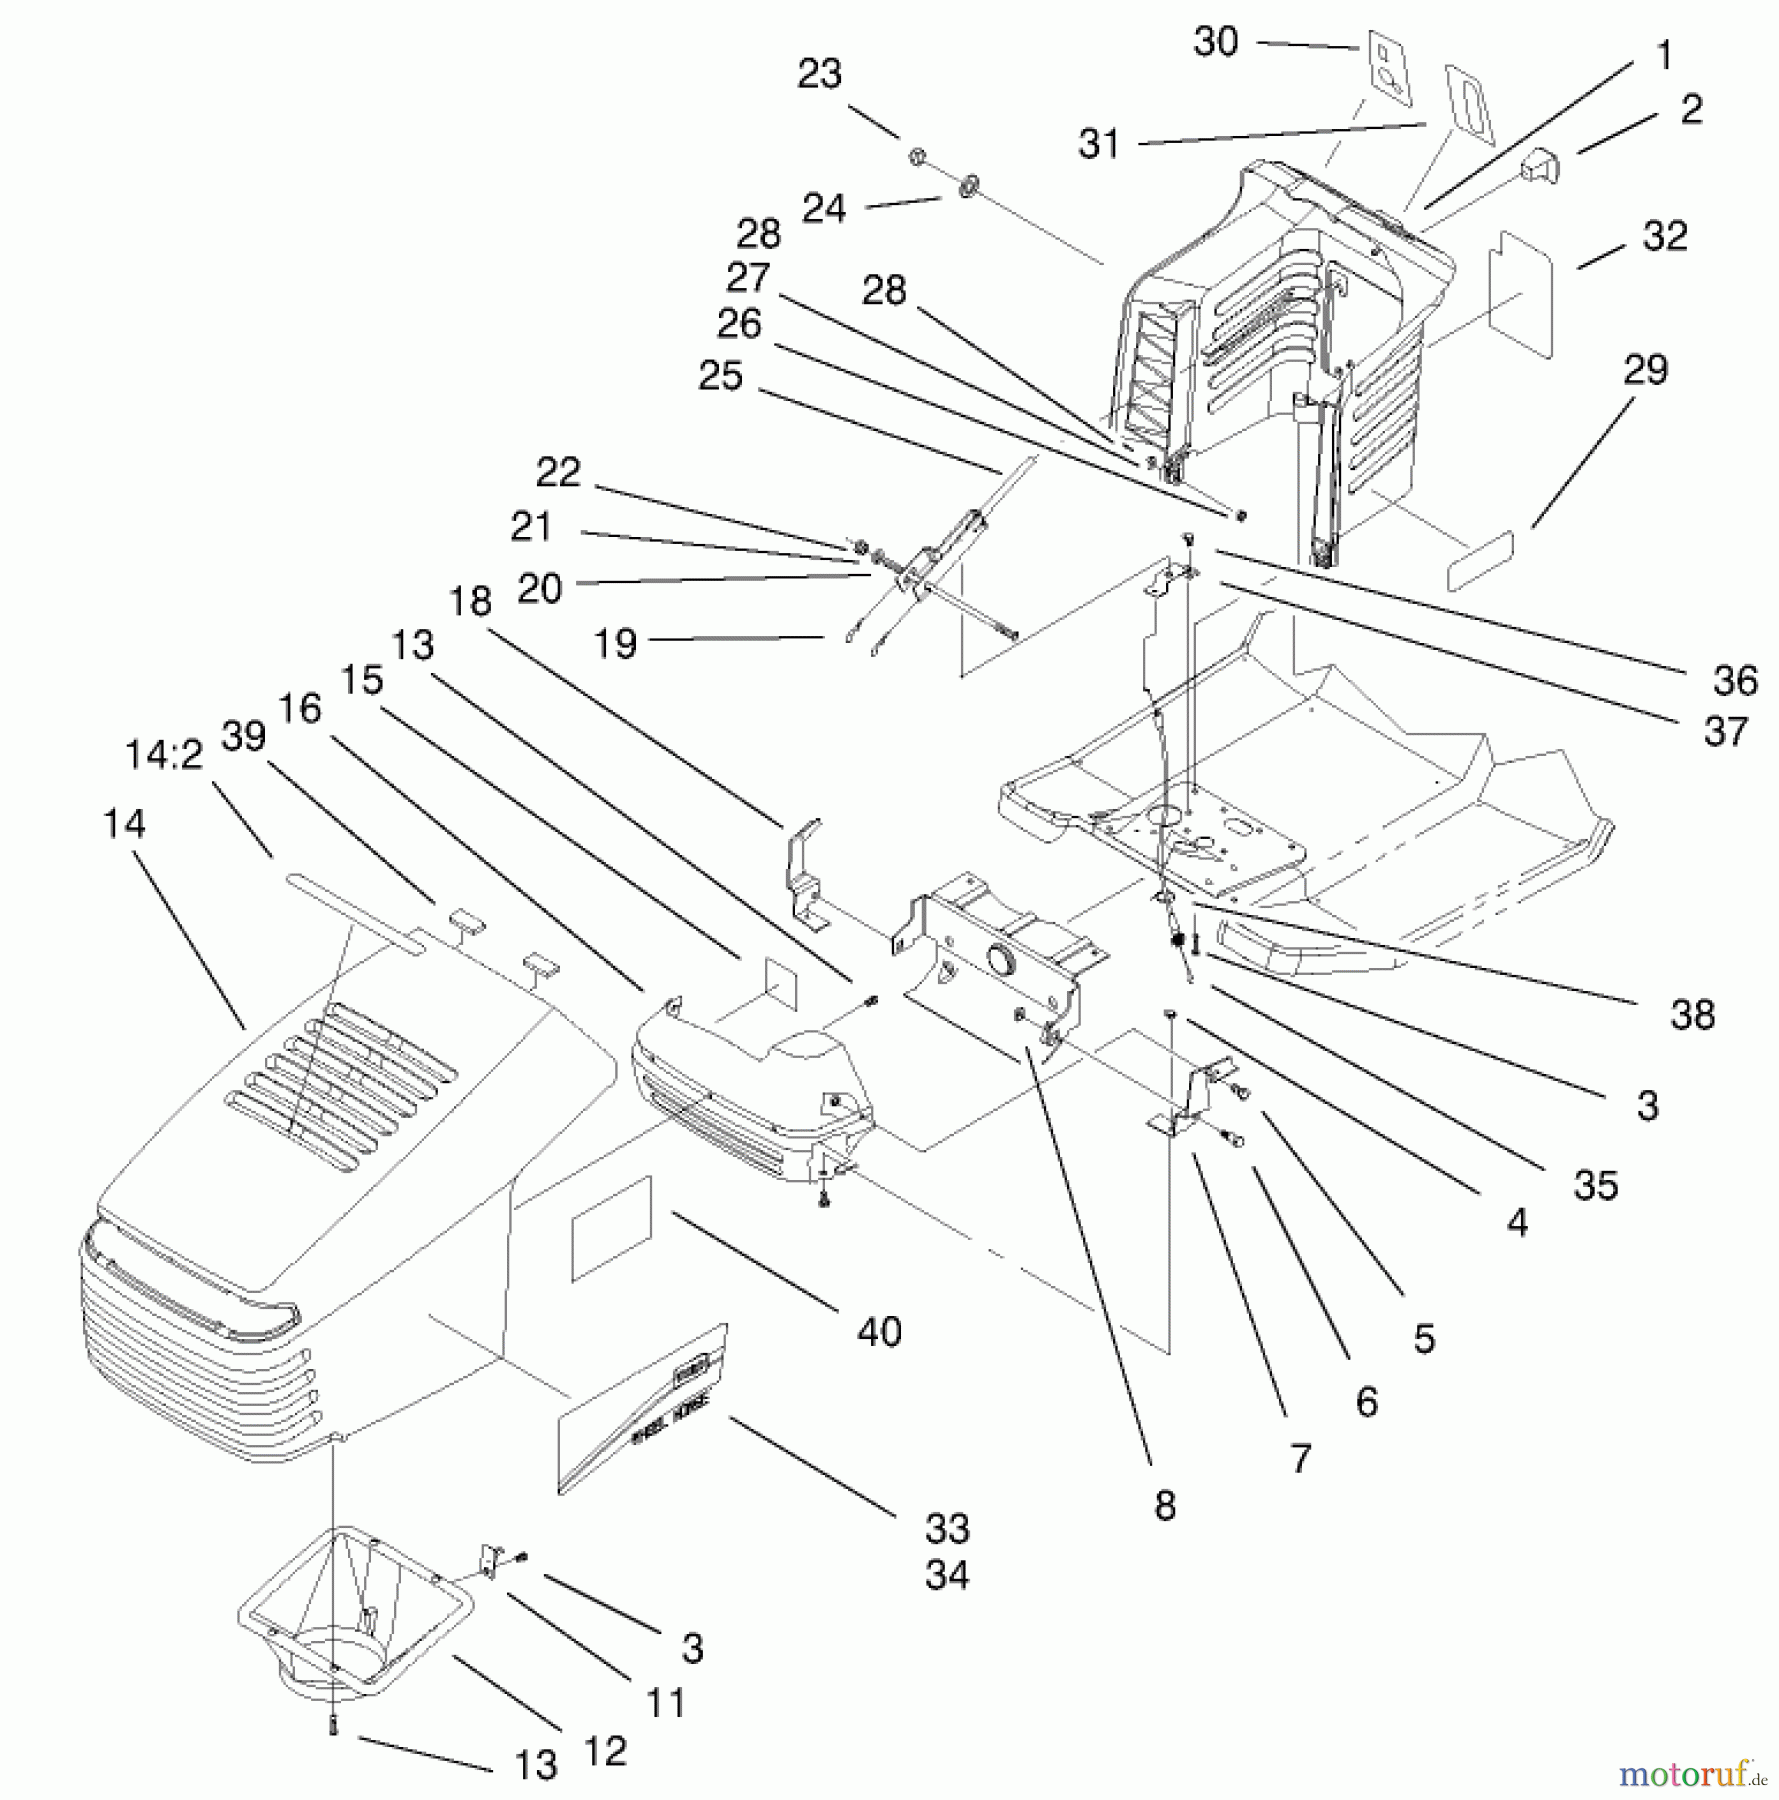  Toro Neu Mowers, Lawn & Garden Tractor Seite 1 77106 (17-44H) - Toro 17-44H Lawn Tractor, 2000 (200000001-200999999) HOOD & TOWER ASSEMBLY